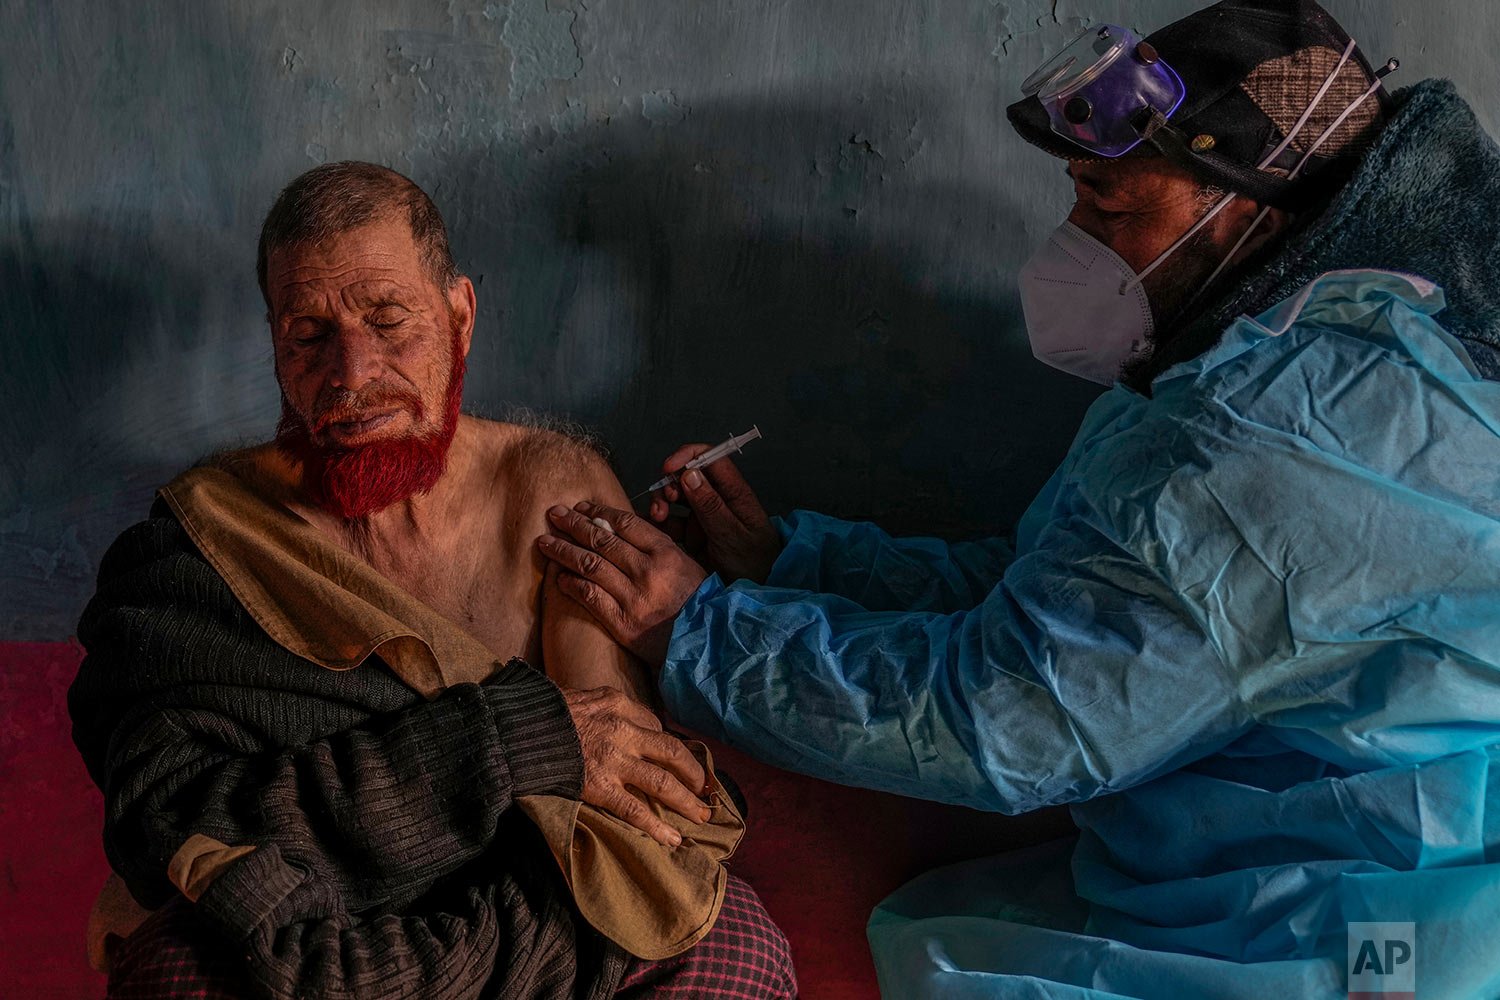  Jaffar Ali, a healthcare worker, administers a dose of Covishield vaccine to Ghulam Yousaf Mir during a COVID-19 vaccination drive in Gagangeer, northeast of Srinagar, Indian controlled Kashmir, Jan. 12, 2022. (AP Photo/Dar Yasin) 